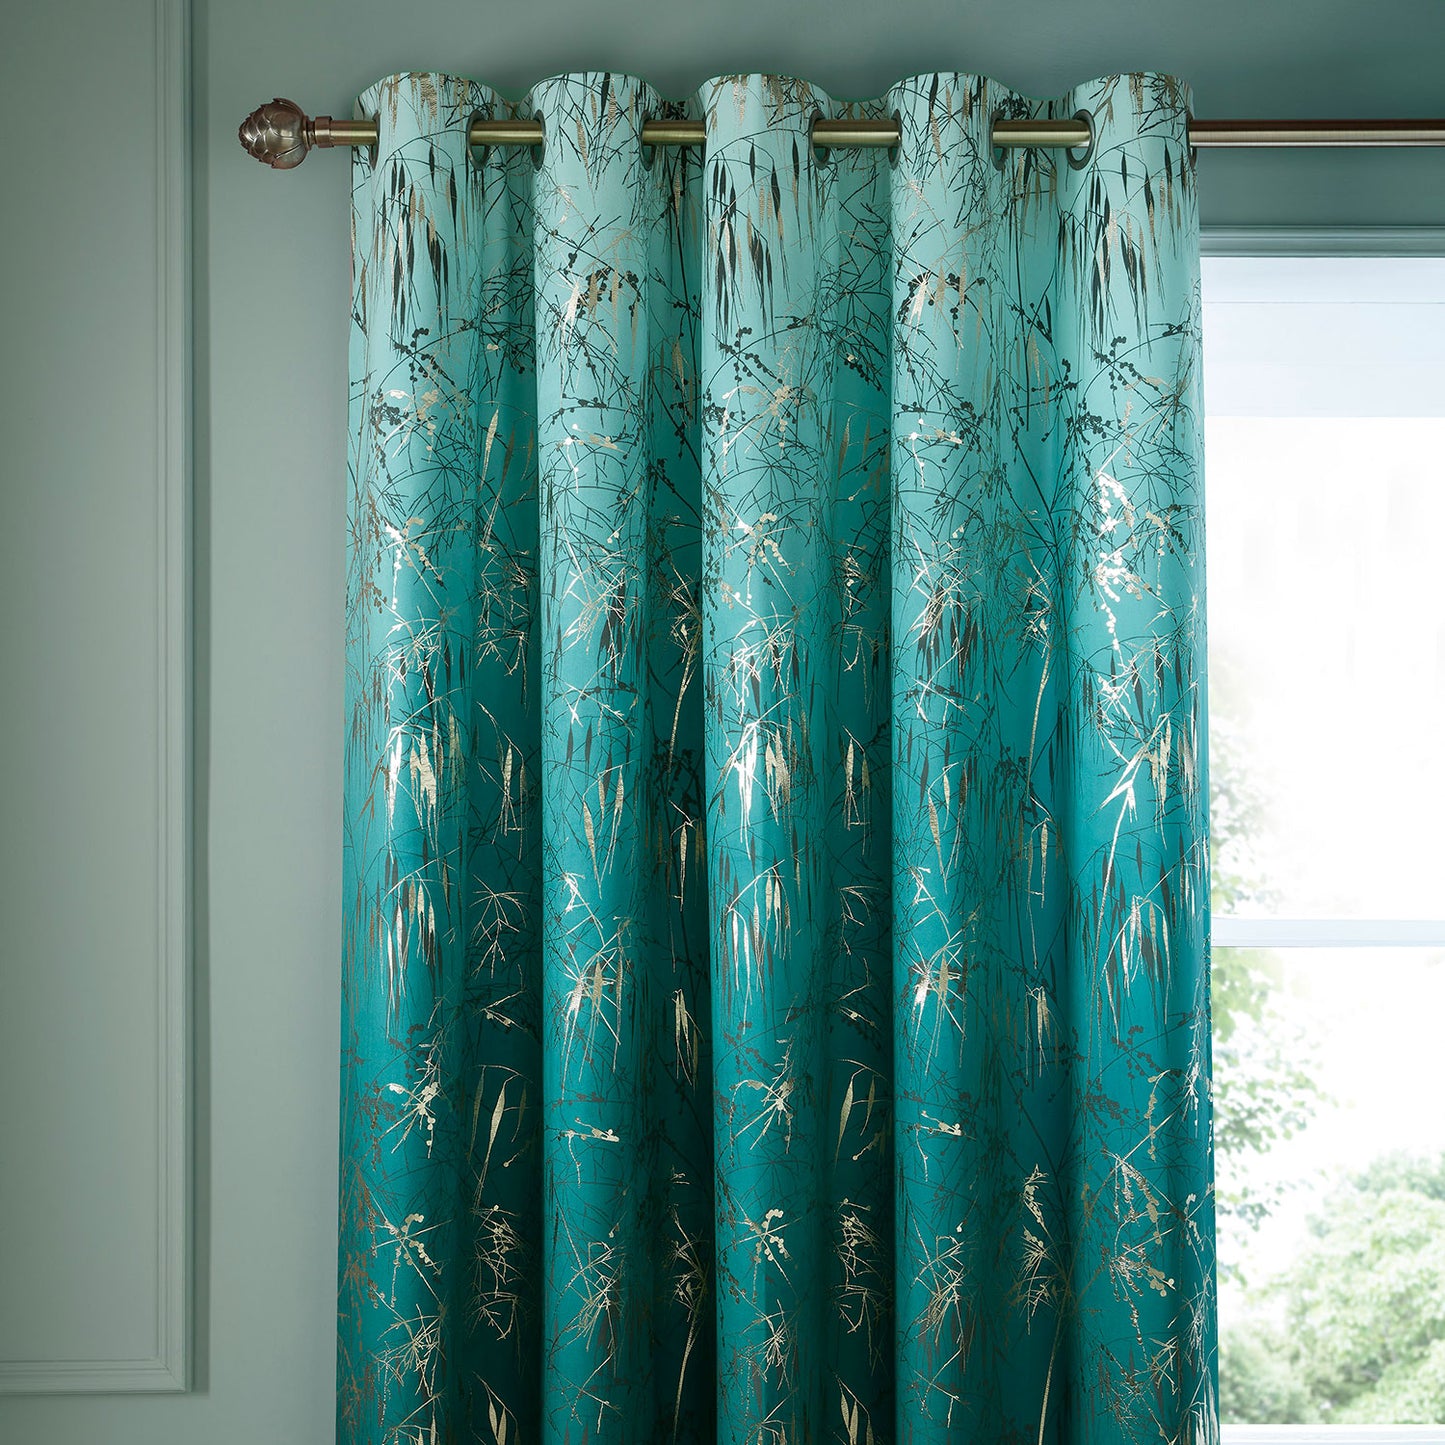 Clarissa Hulse Meadow Grass Teal Velvet Lined Eyelet Curtains